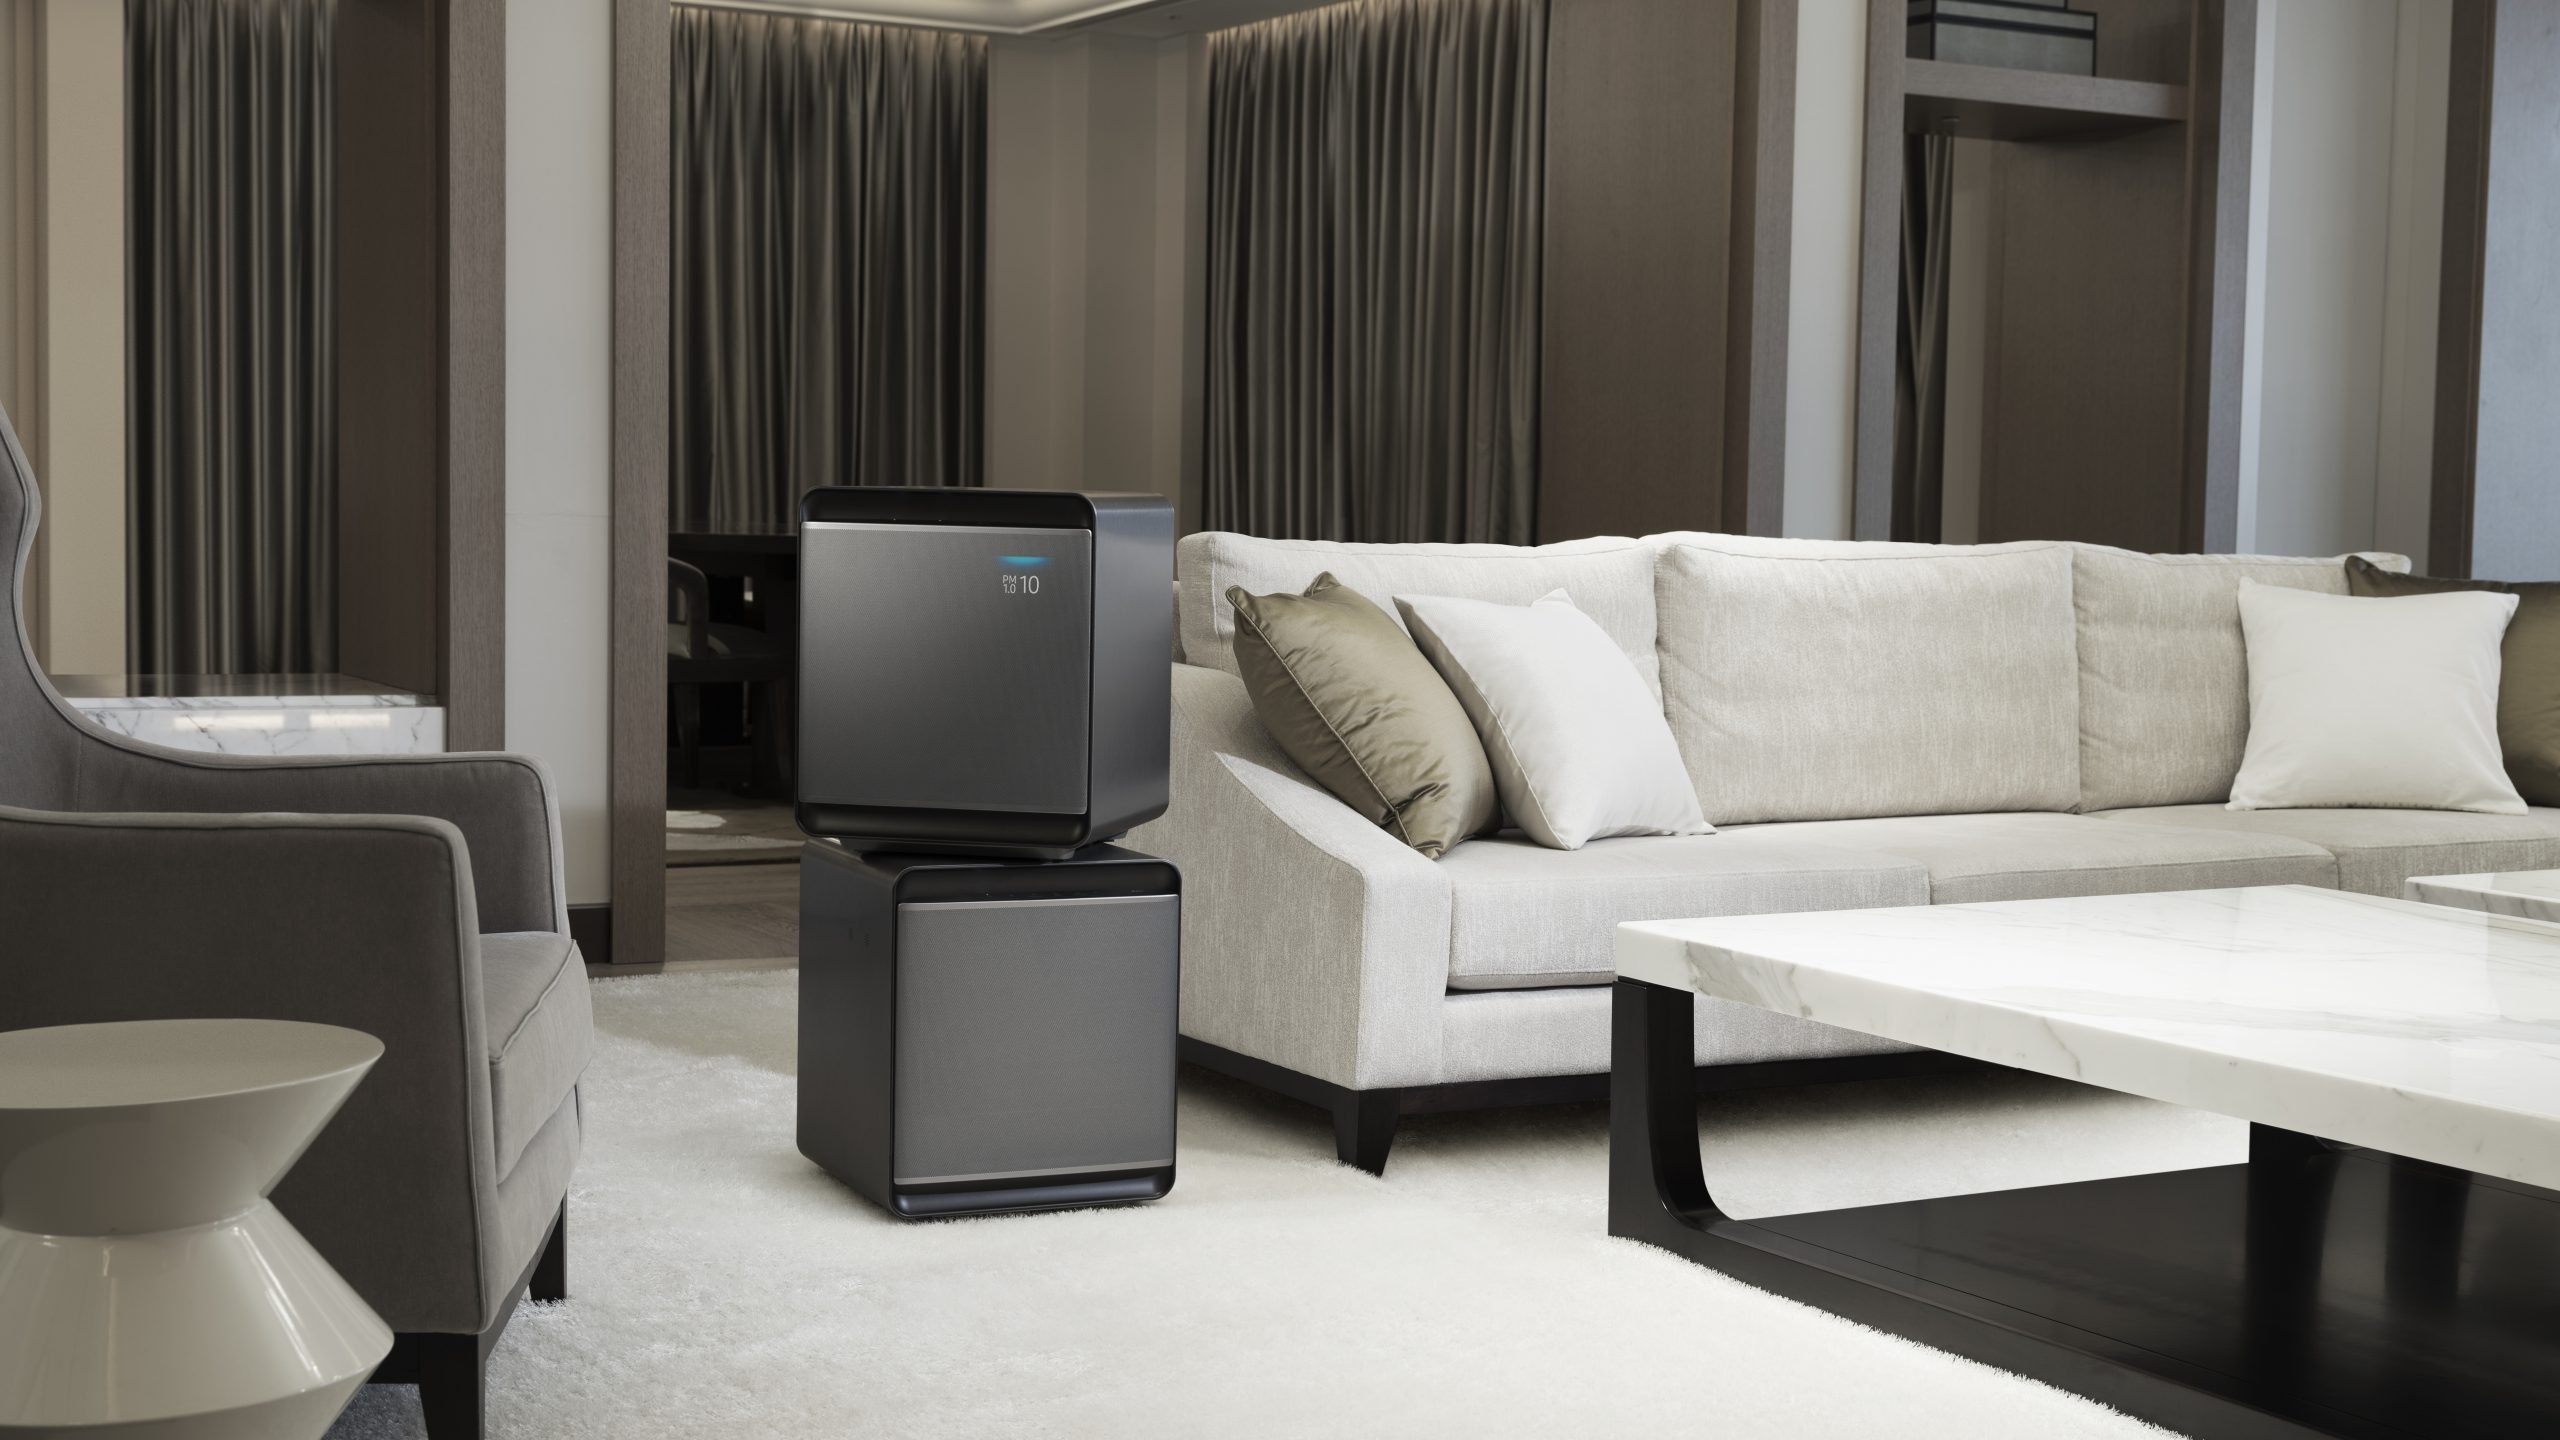 AX9500 Air Purifier Samsung 2 scaled Samsung Launch Air Purifiers That Can Capture 99.97% Of Dust, Bacteria & Allergens